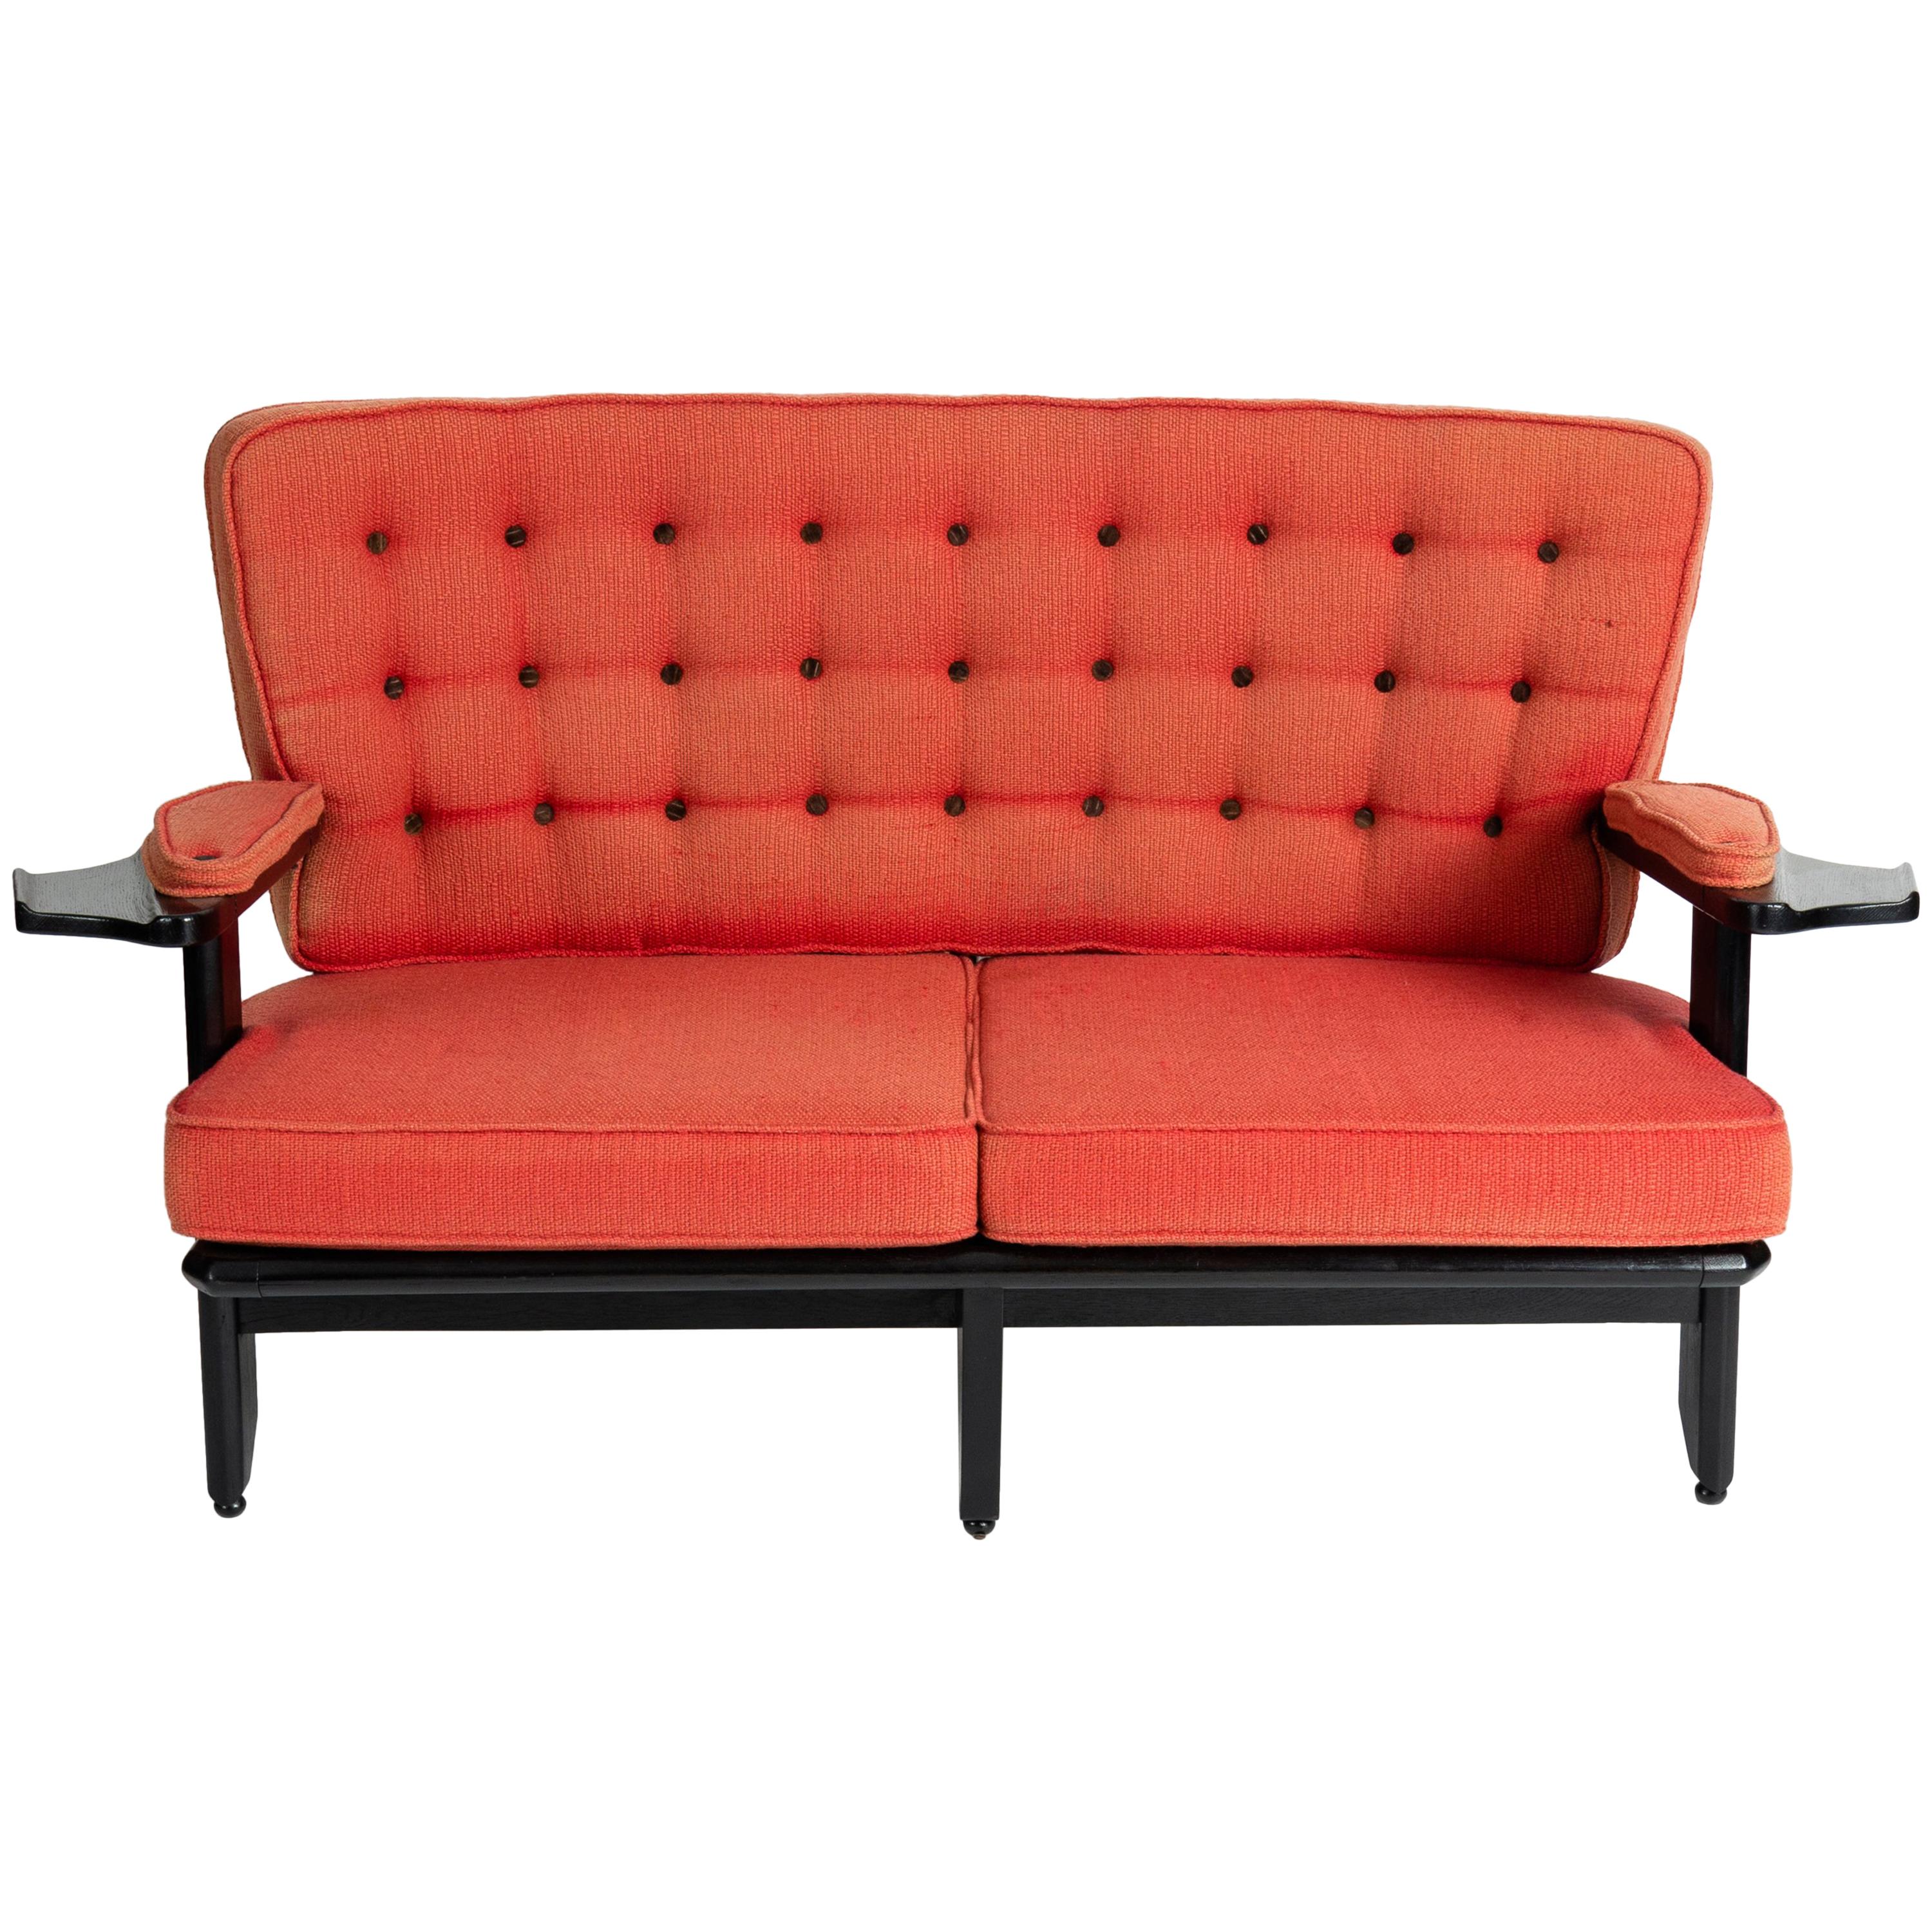 Guillerme et Chambron, Catherine, Sofa with Winged Arms, France, Mid-Century